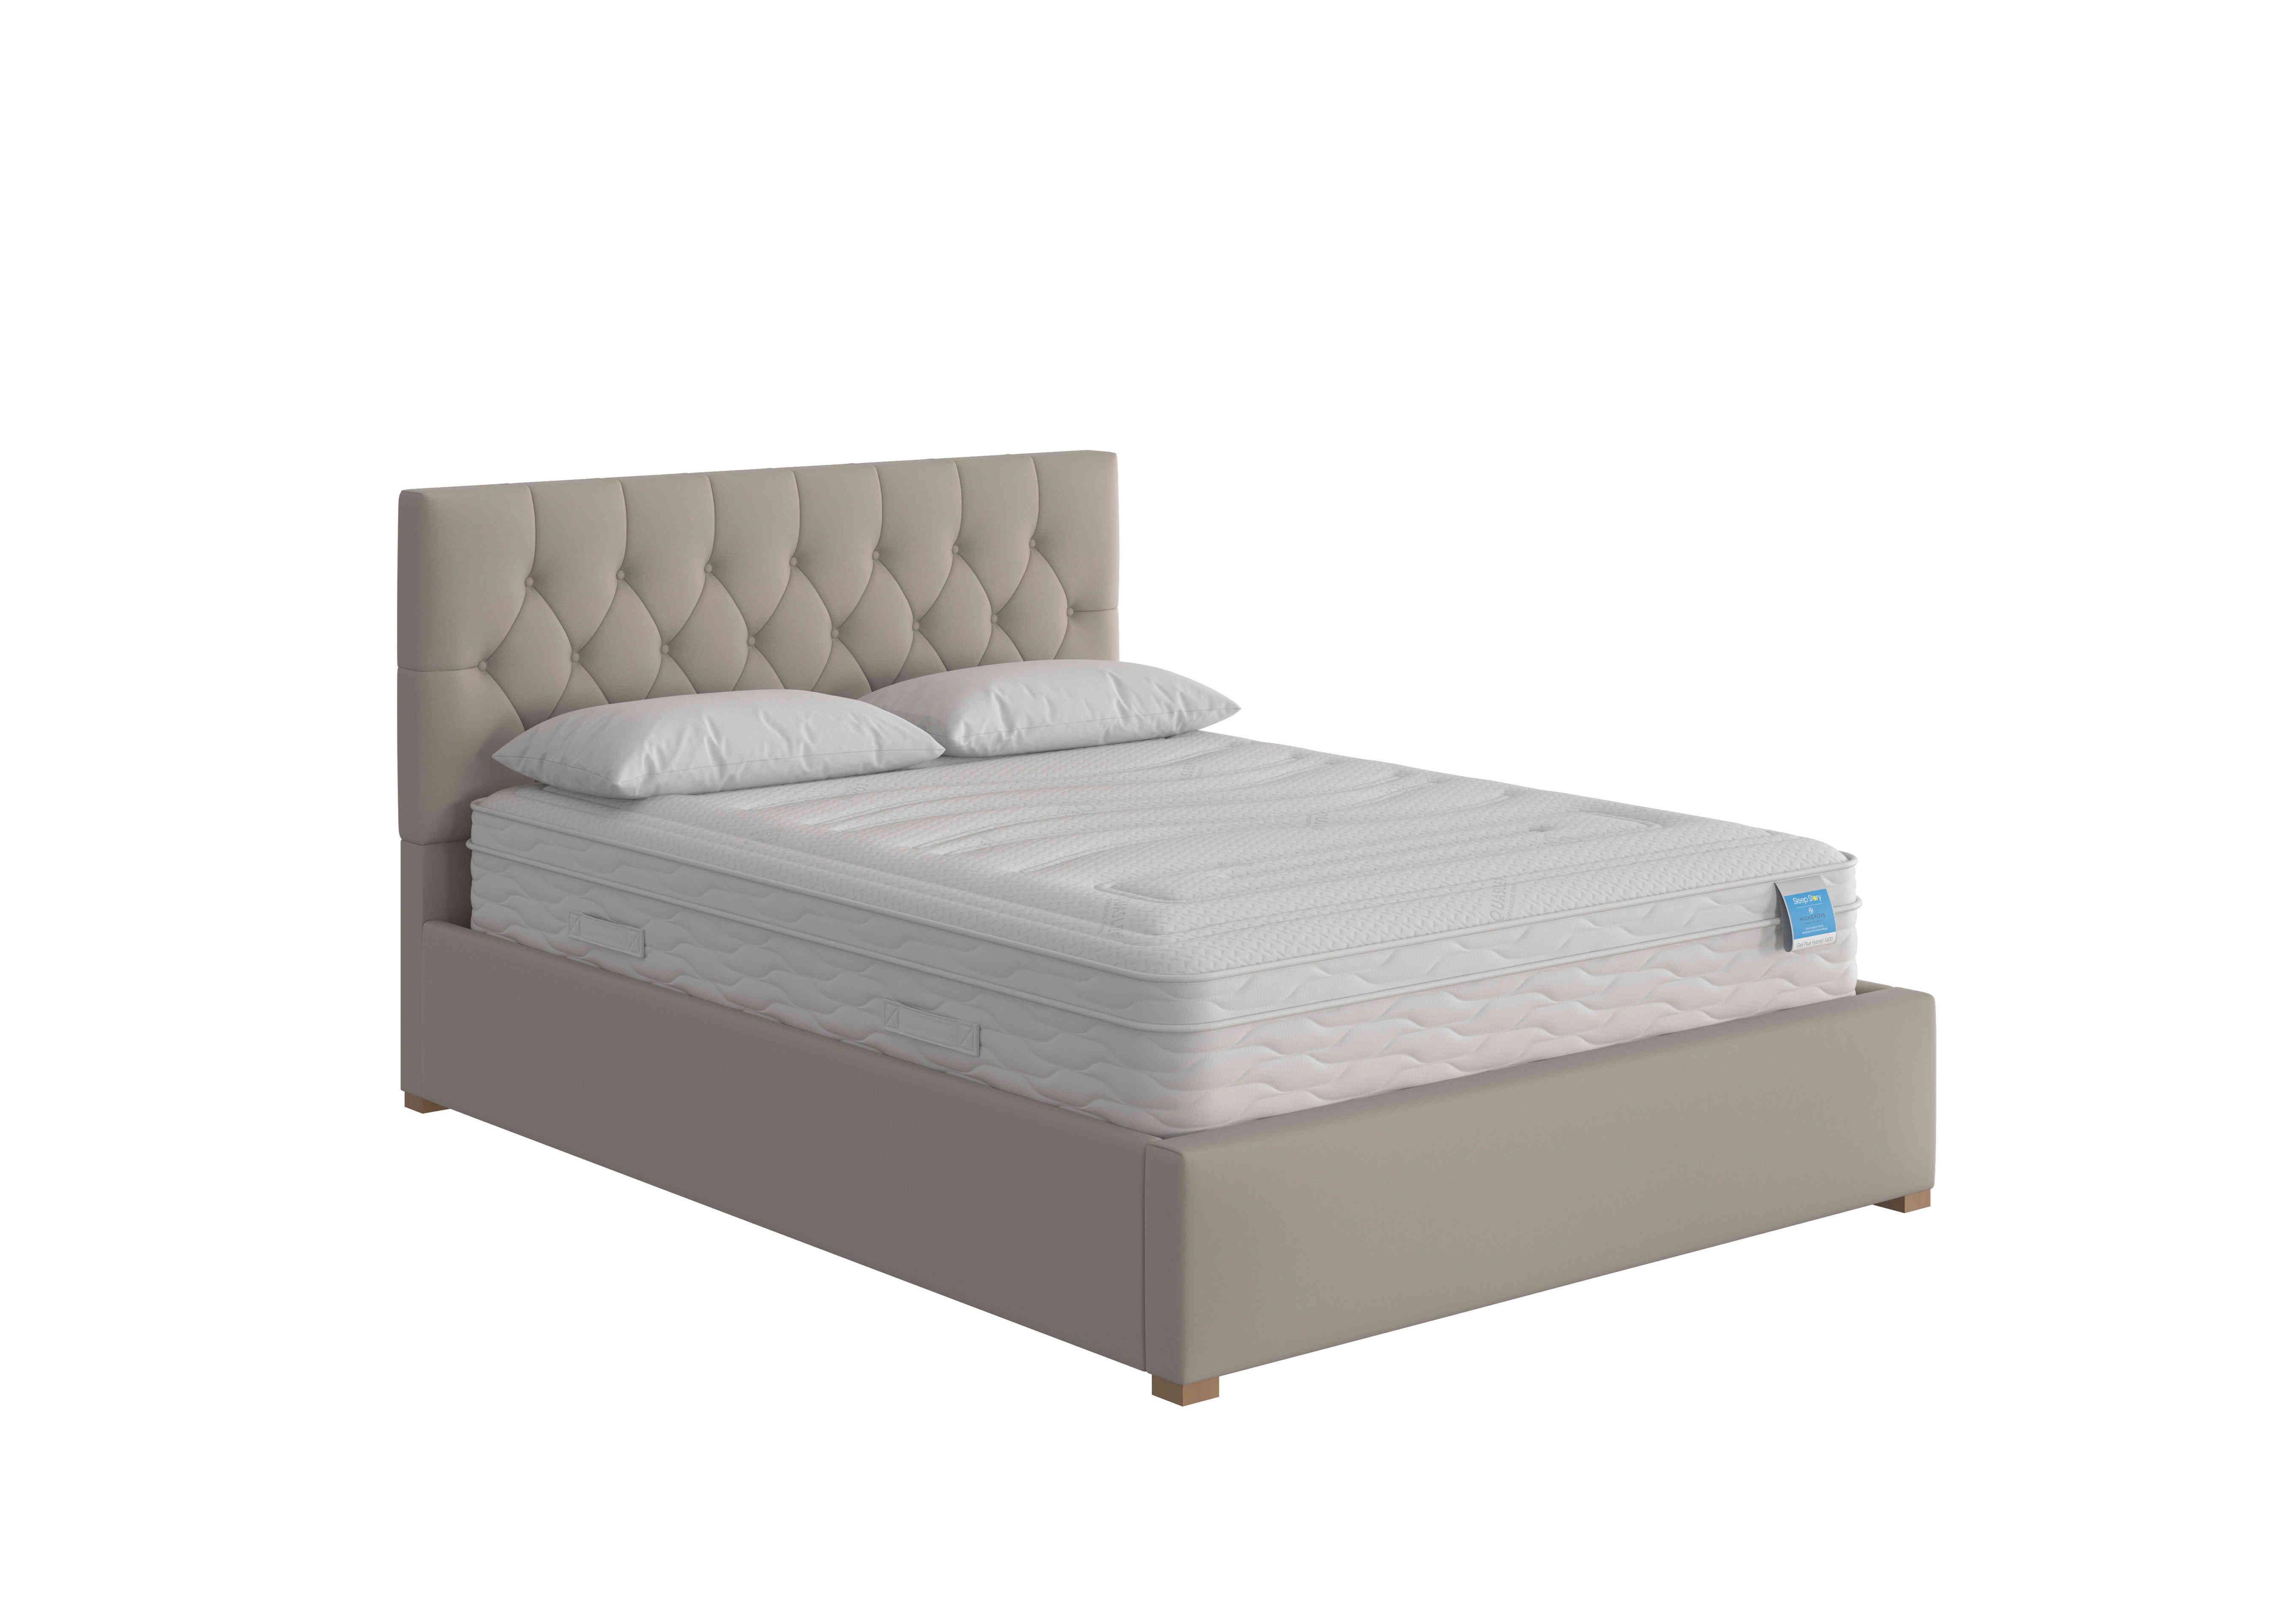 Henry Ottoman Bed Frame in Eire Linen Off White on Furniture Village